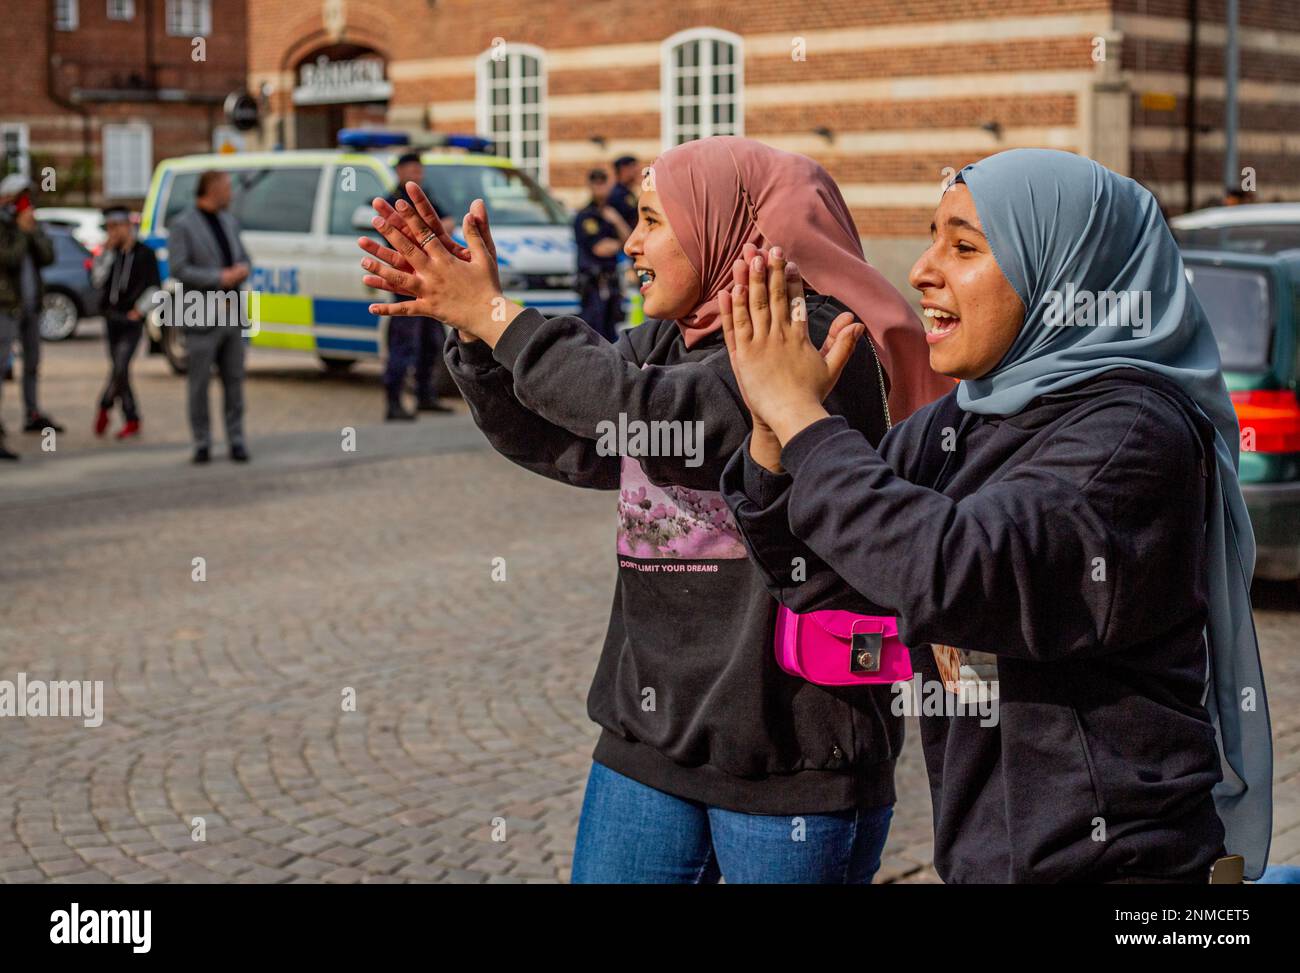 KRISTIANSTAD, SWEDEN - MAY 14, 2021: Muslim girls during a protest against Israels new attacks on Palestine Stock Photo